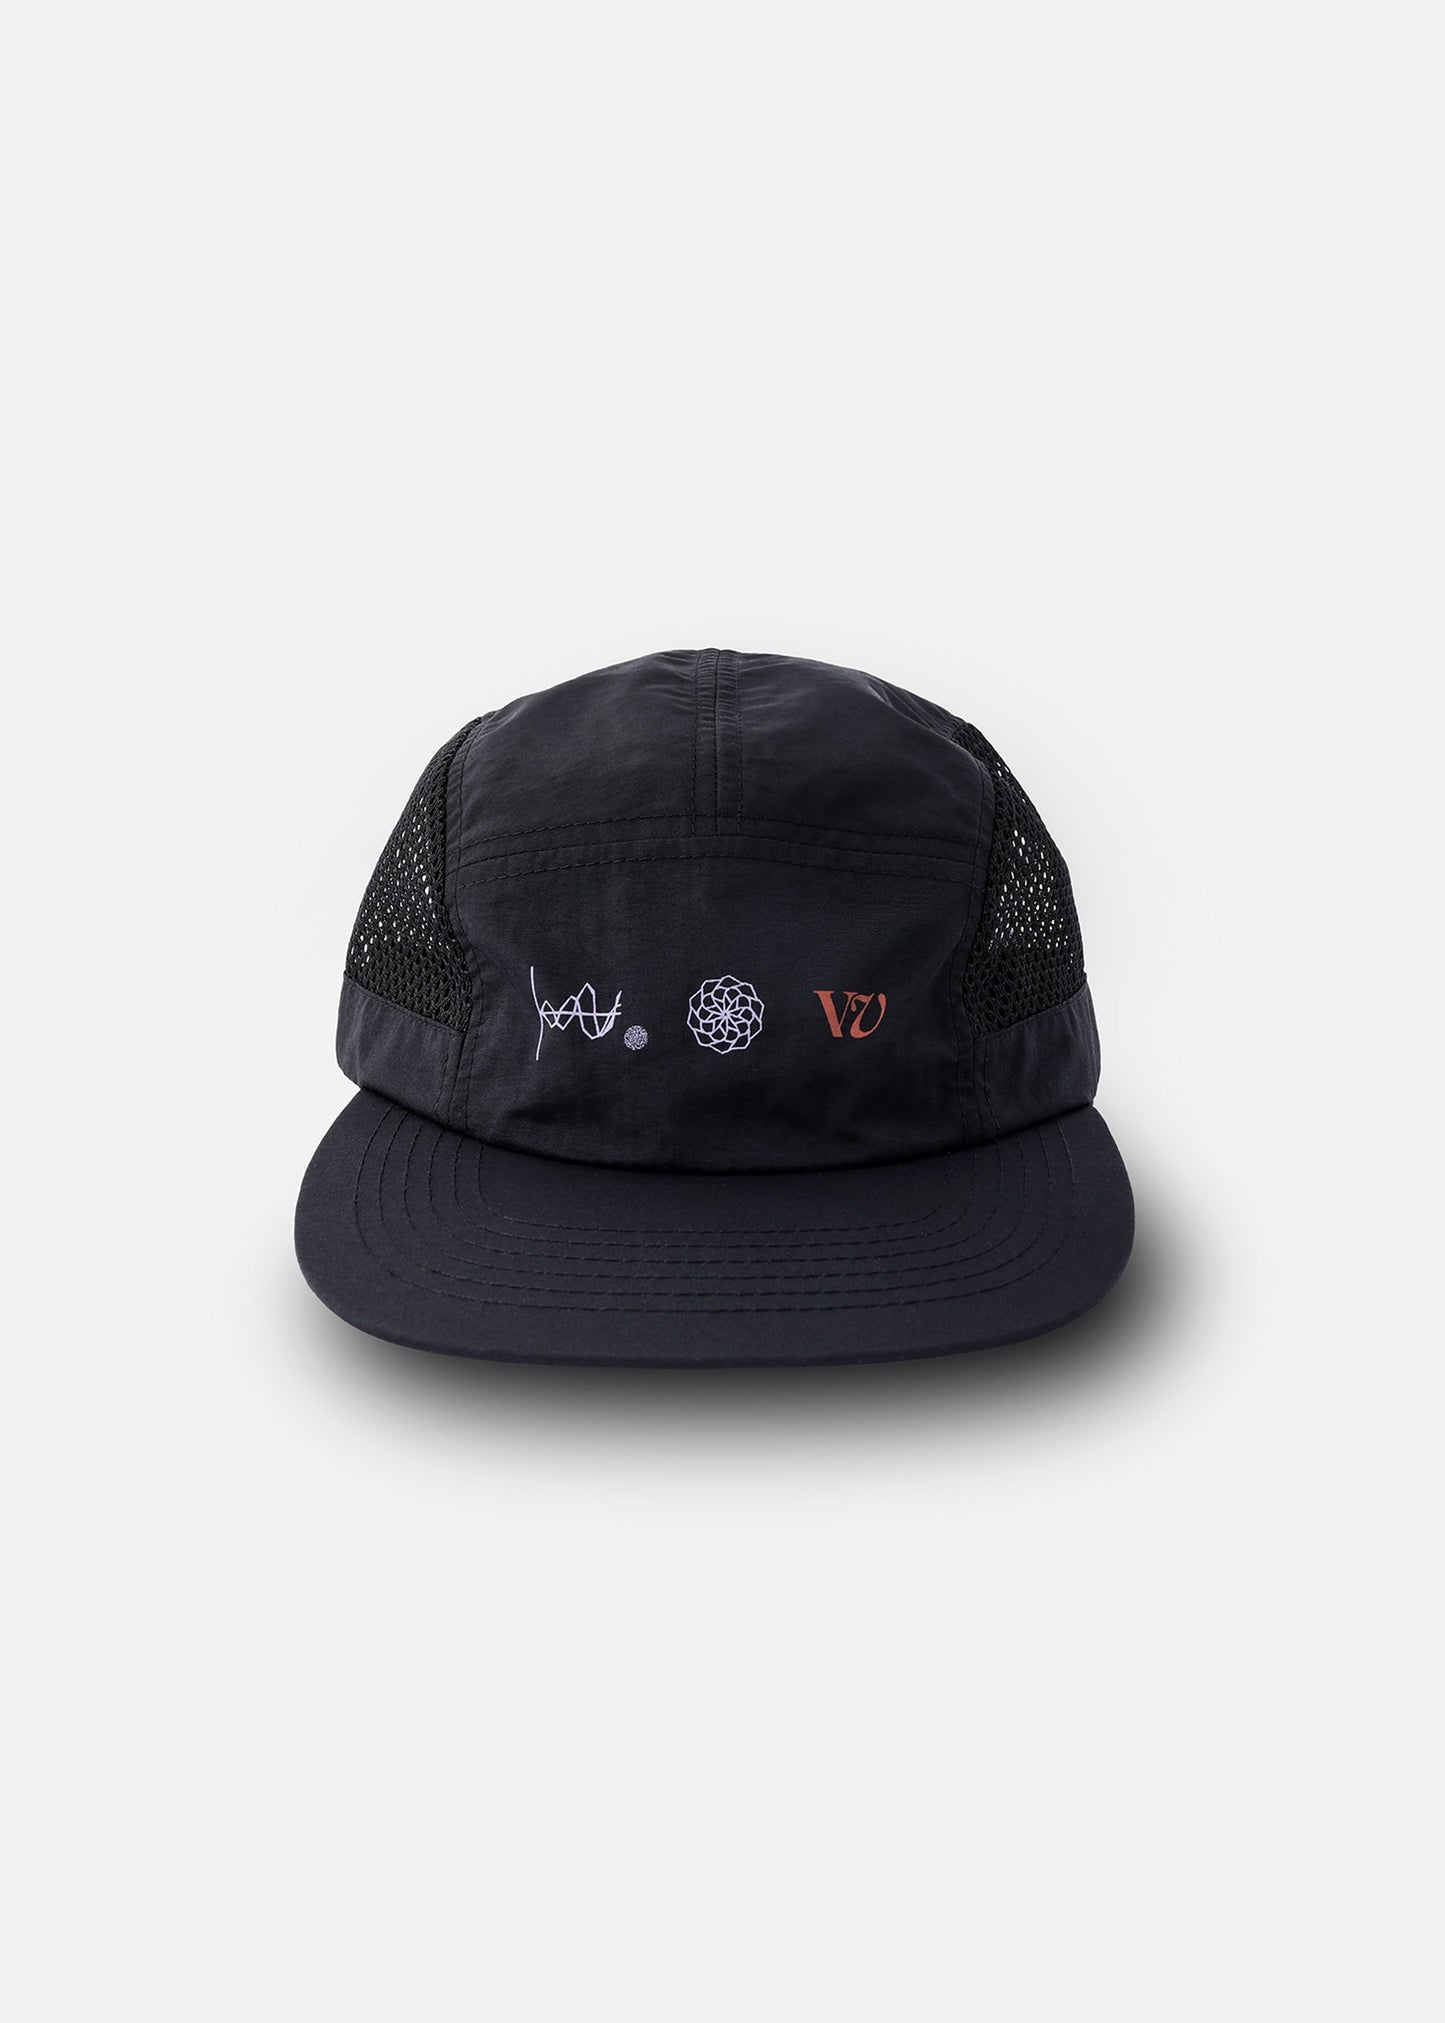 FREQUENCY CAP : BLACK